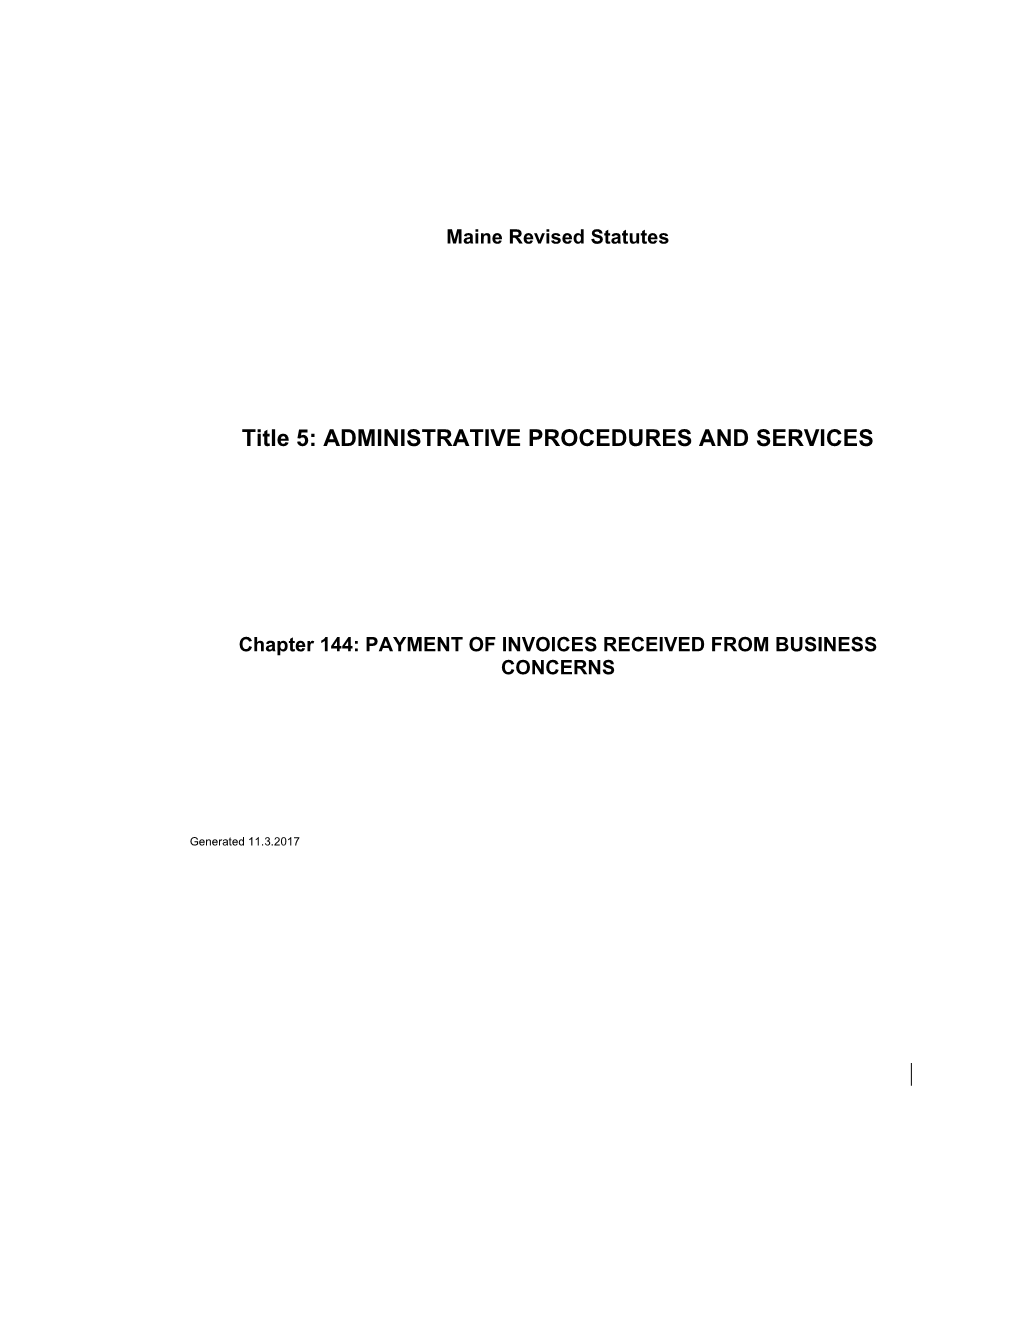 Title 5: ADMINISTRATIVE PROCEDURES and SERVICES s1